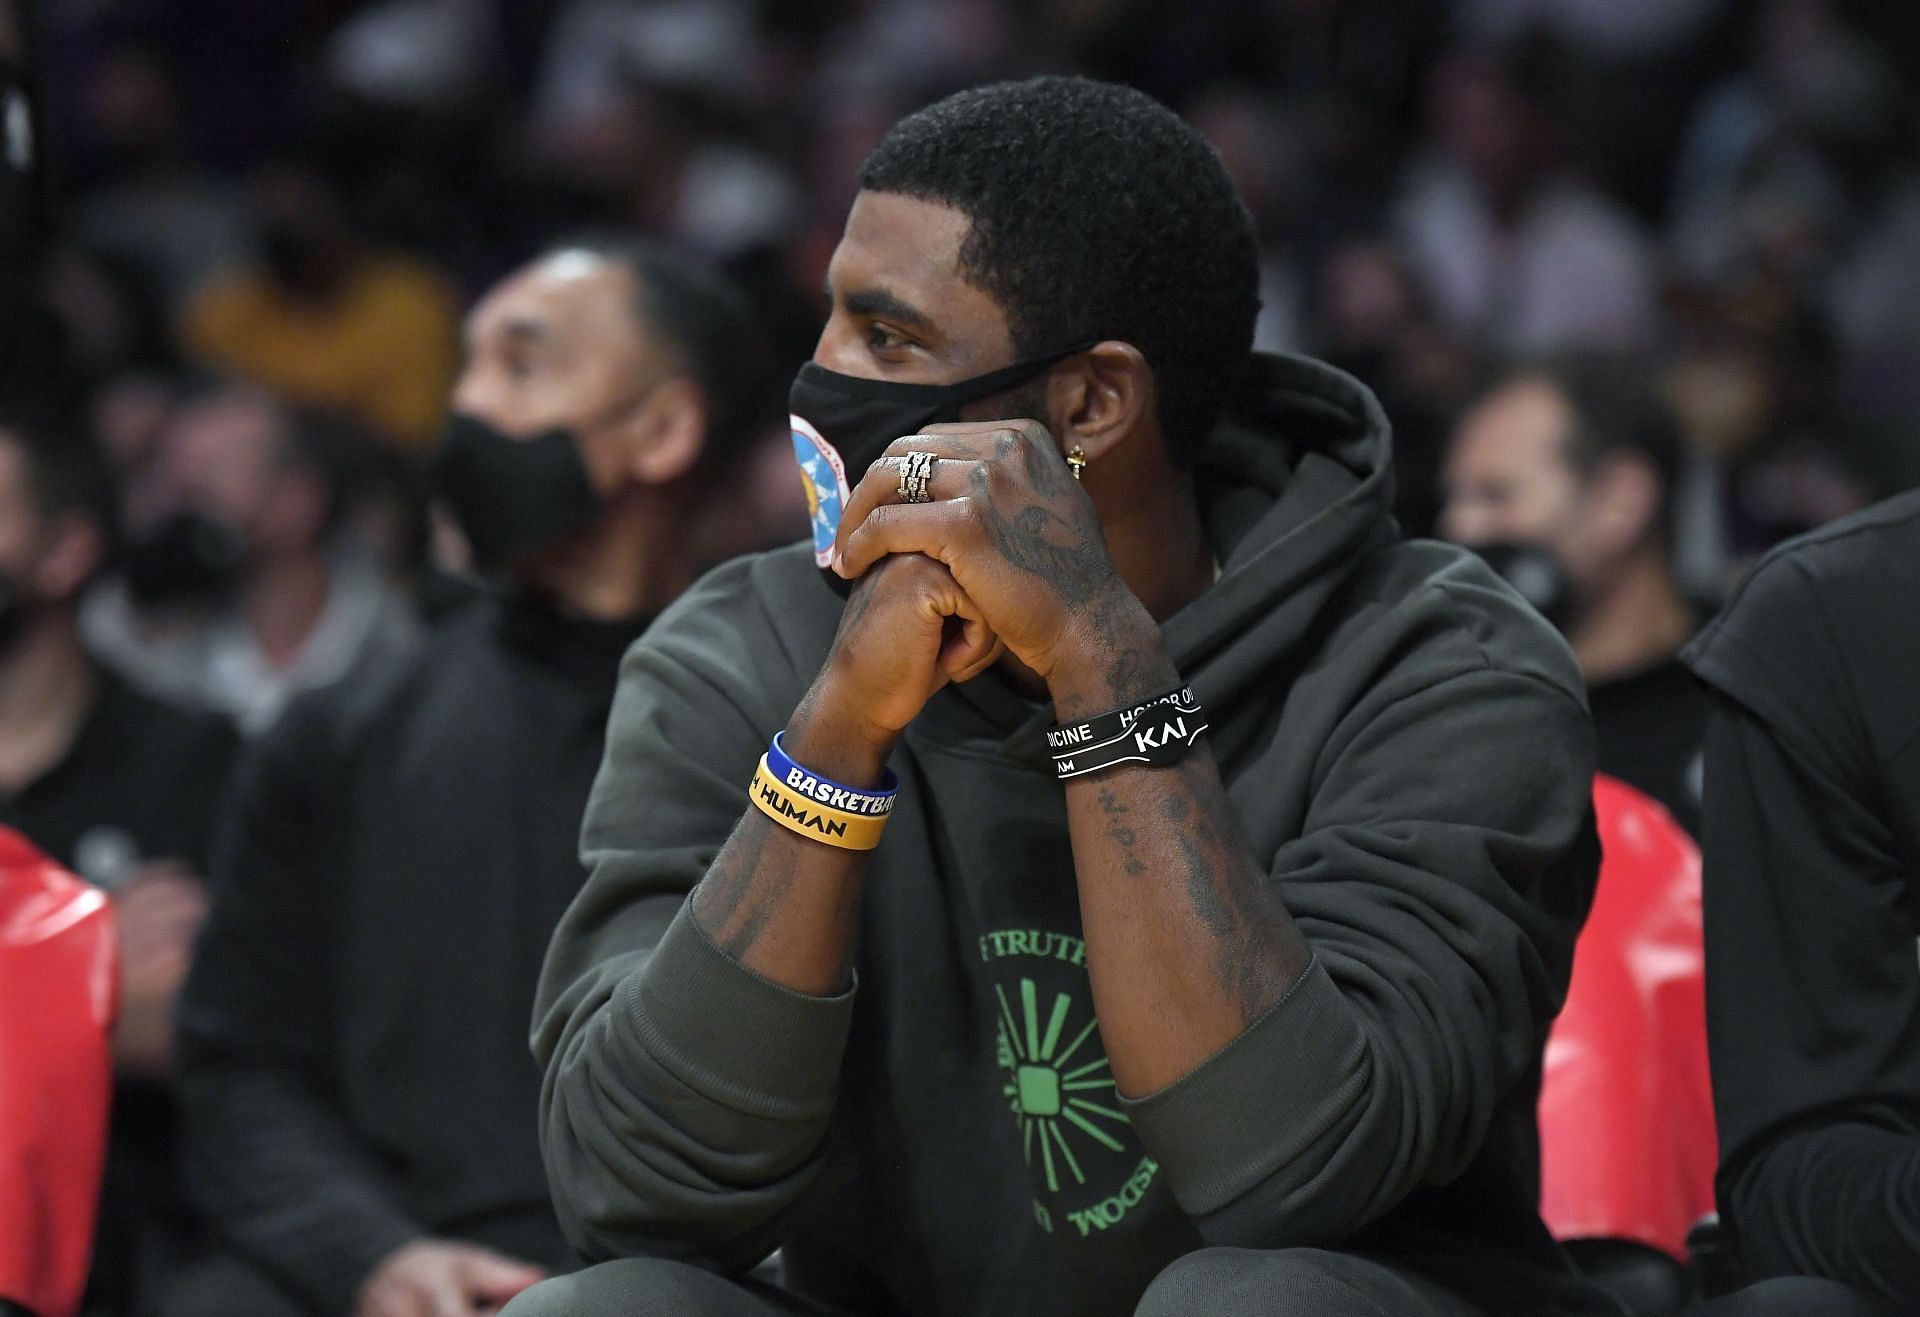 Kyrie Irving could potentially be fined for his absence from the Brooklyn Nets.